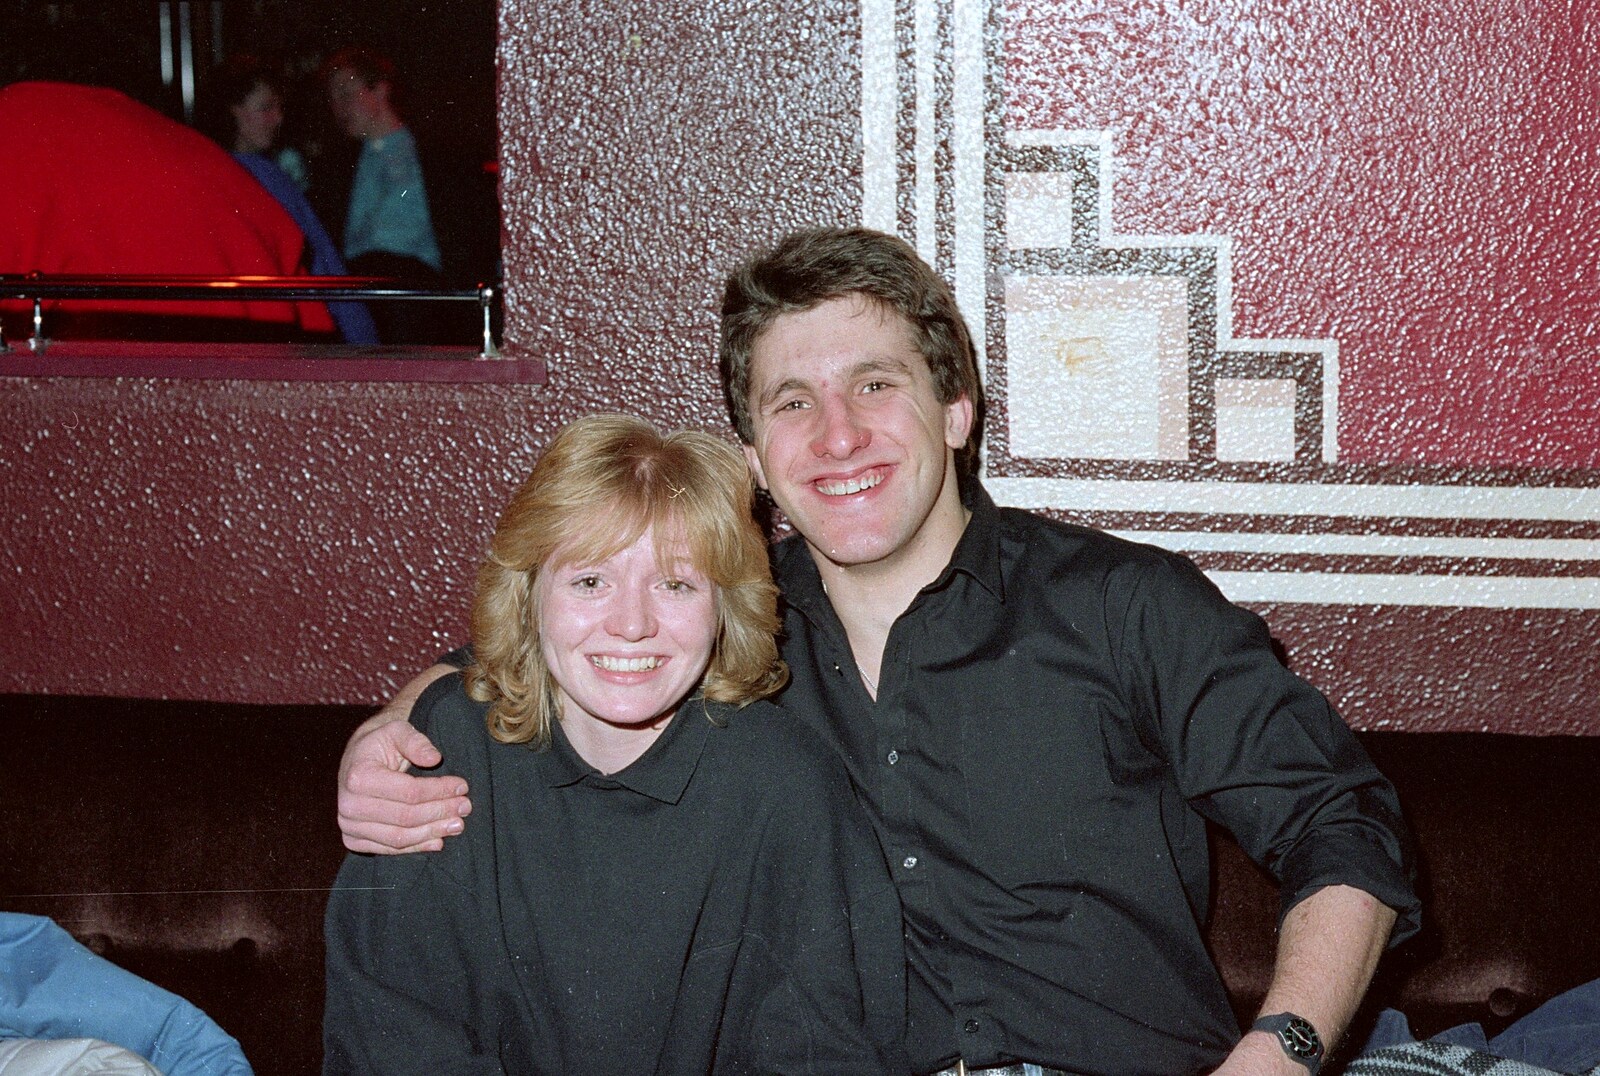 His'n'hers black shirts from Uni: A Party in Snobs Nightclub, Mayflower Street, Plymouth - 18th October 1986